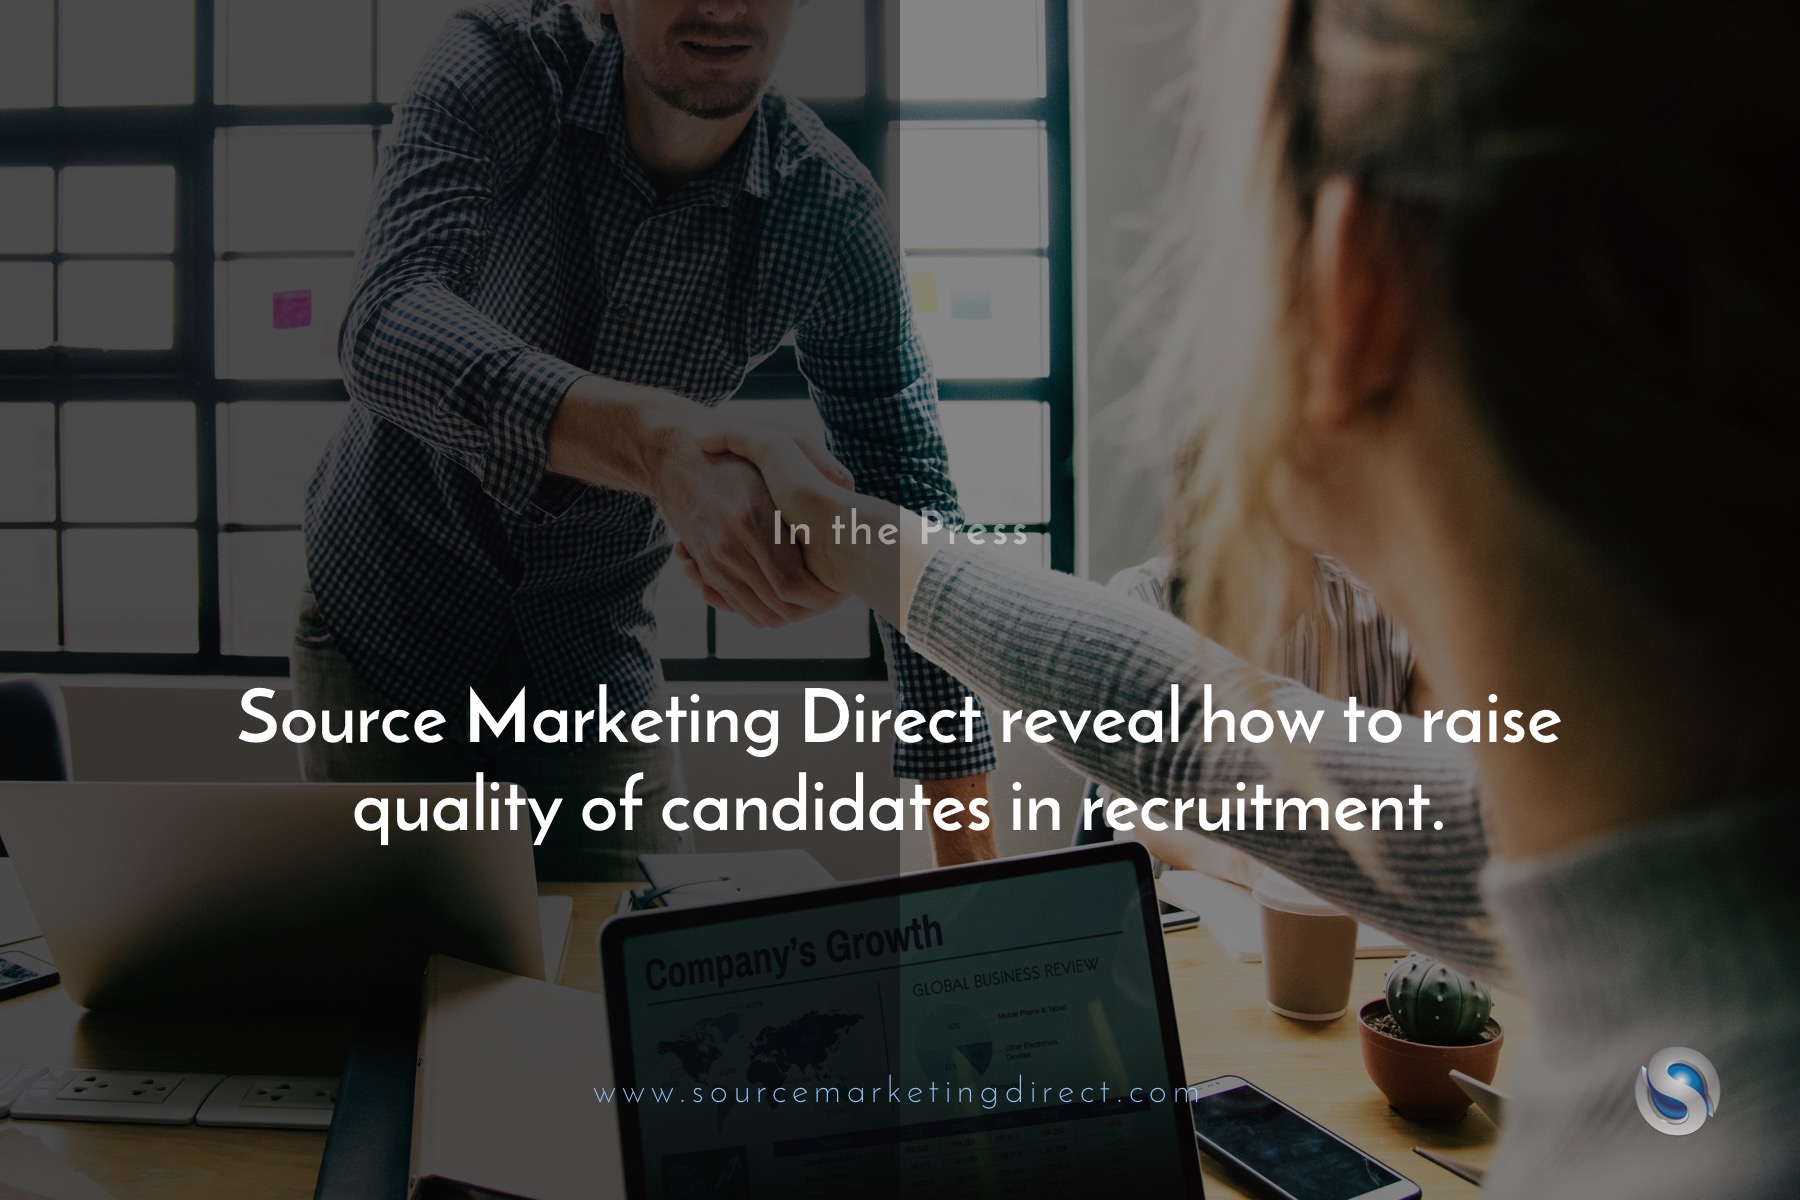 Source Marketing Direct reveal how to raise quality of candidates in recruitment.